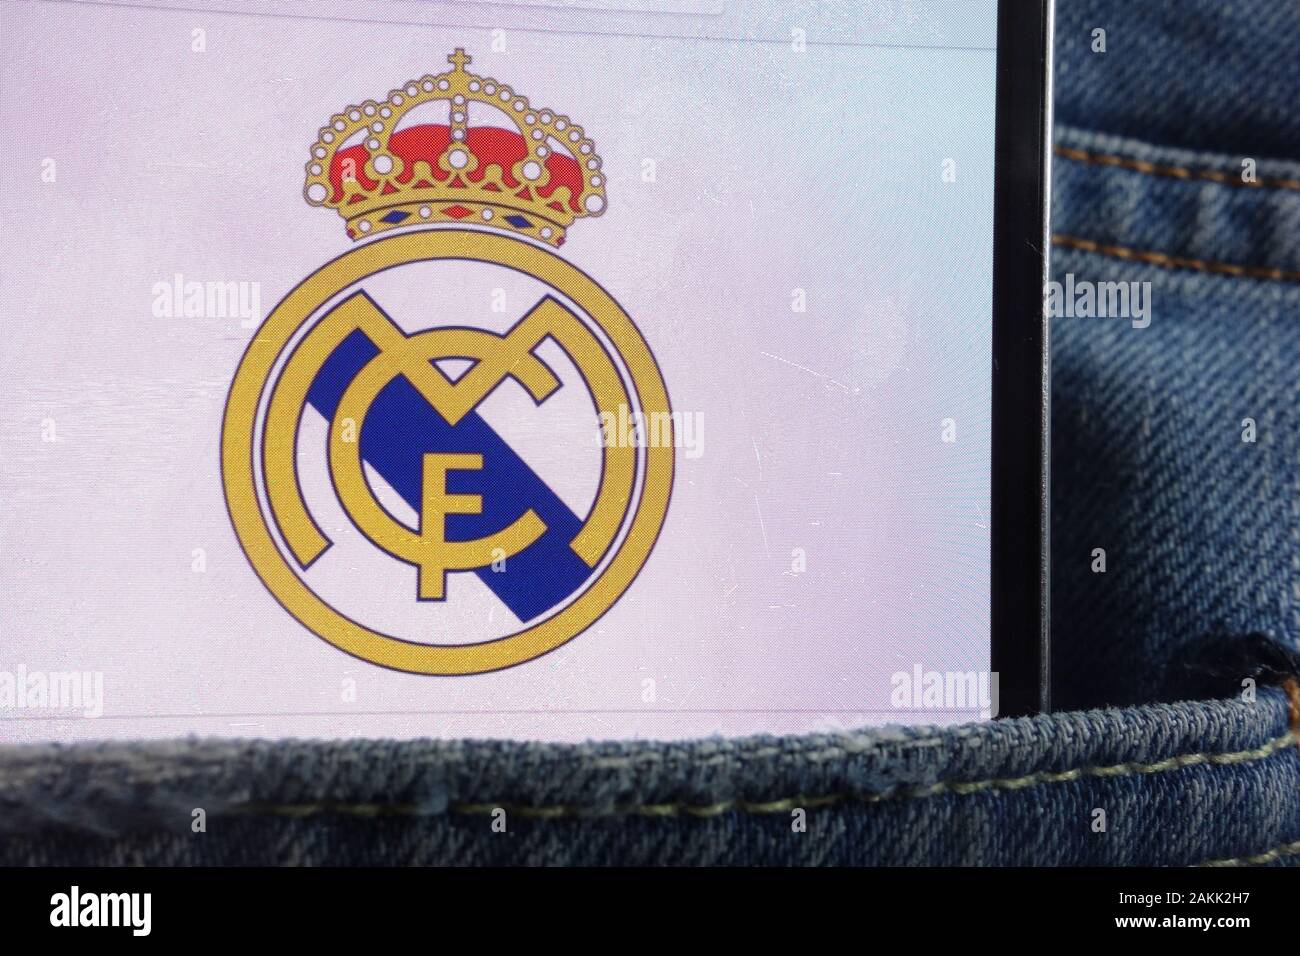 Real Madrid logo displayed on smartphone hidden in jeans pocket Stock Photo